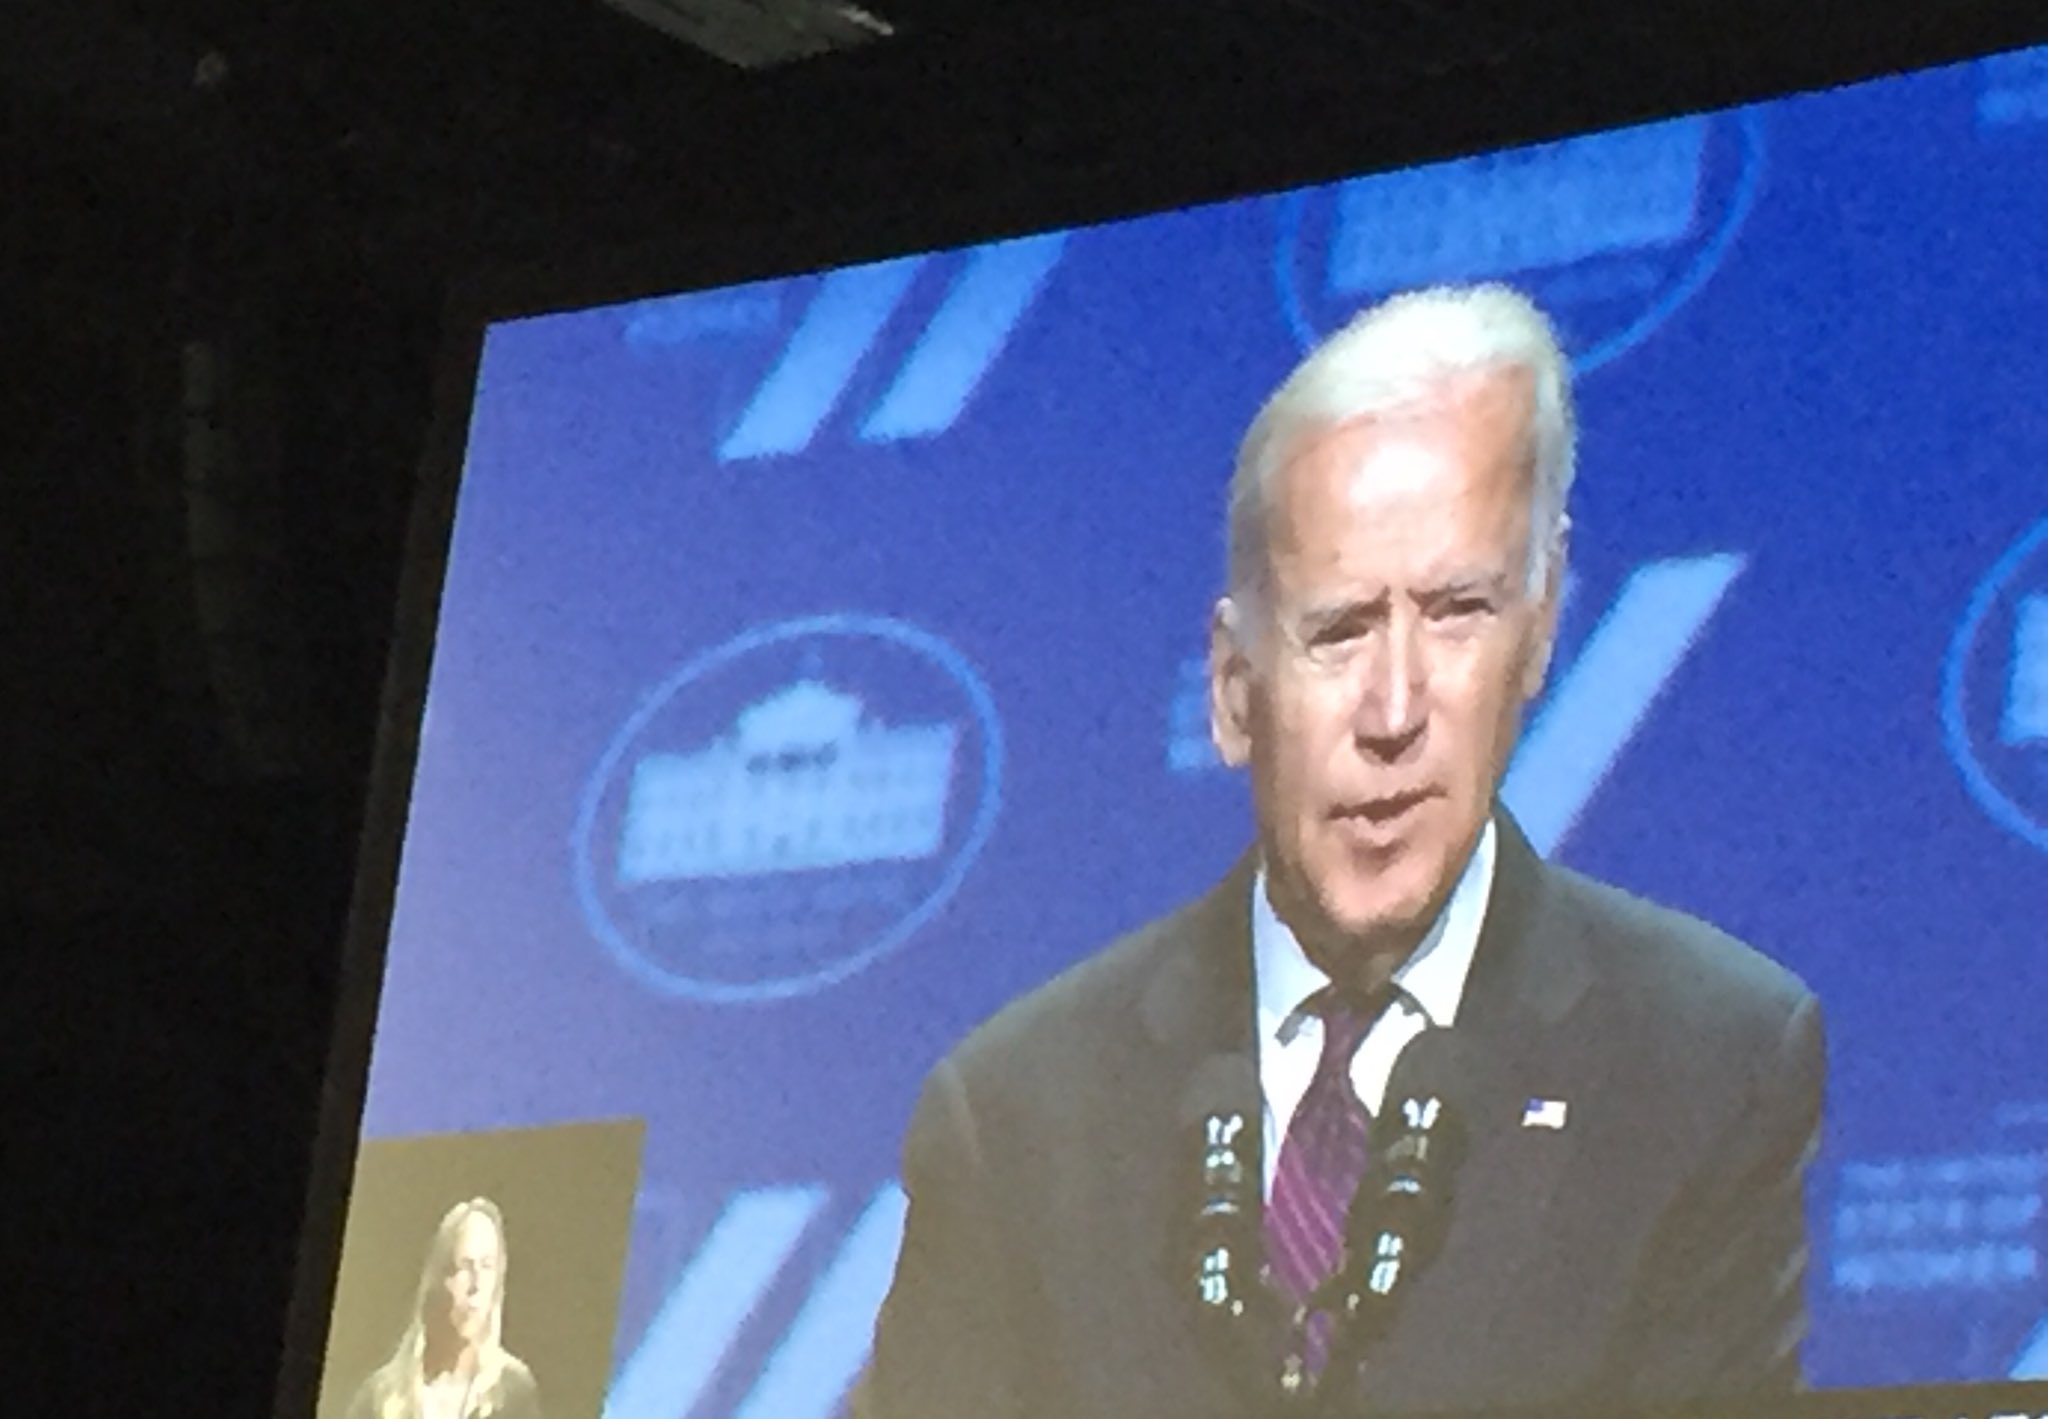 Vice President Joe Biden urges early work on Violence Against Women Act